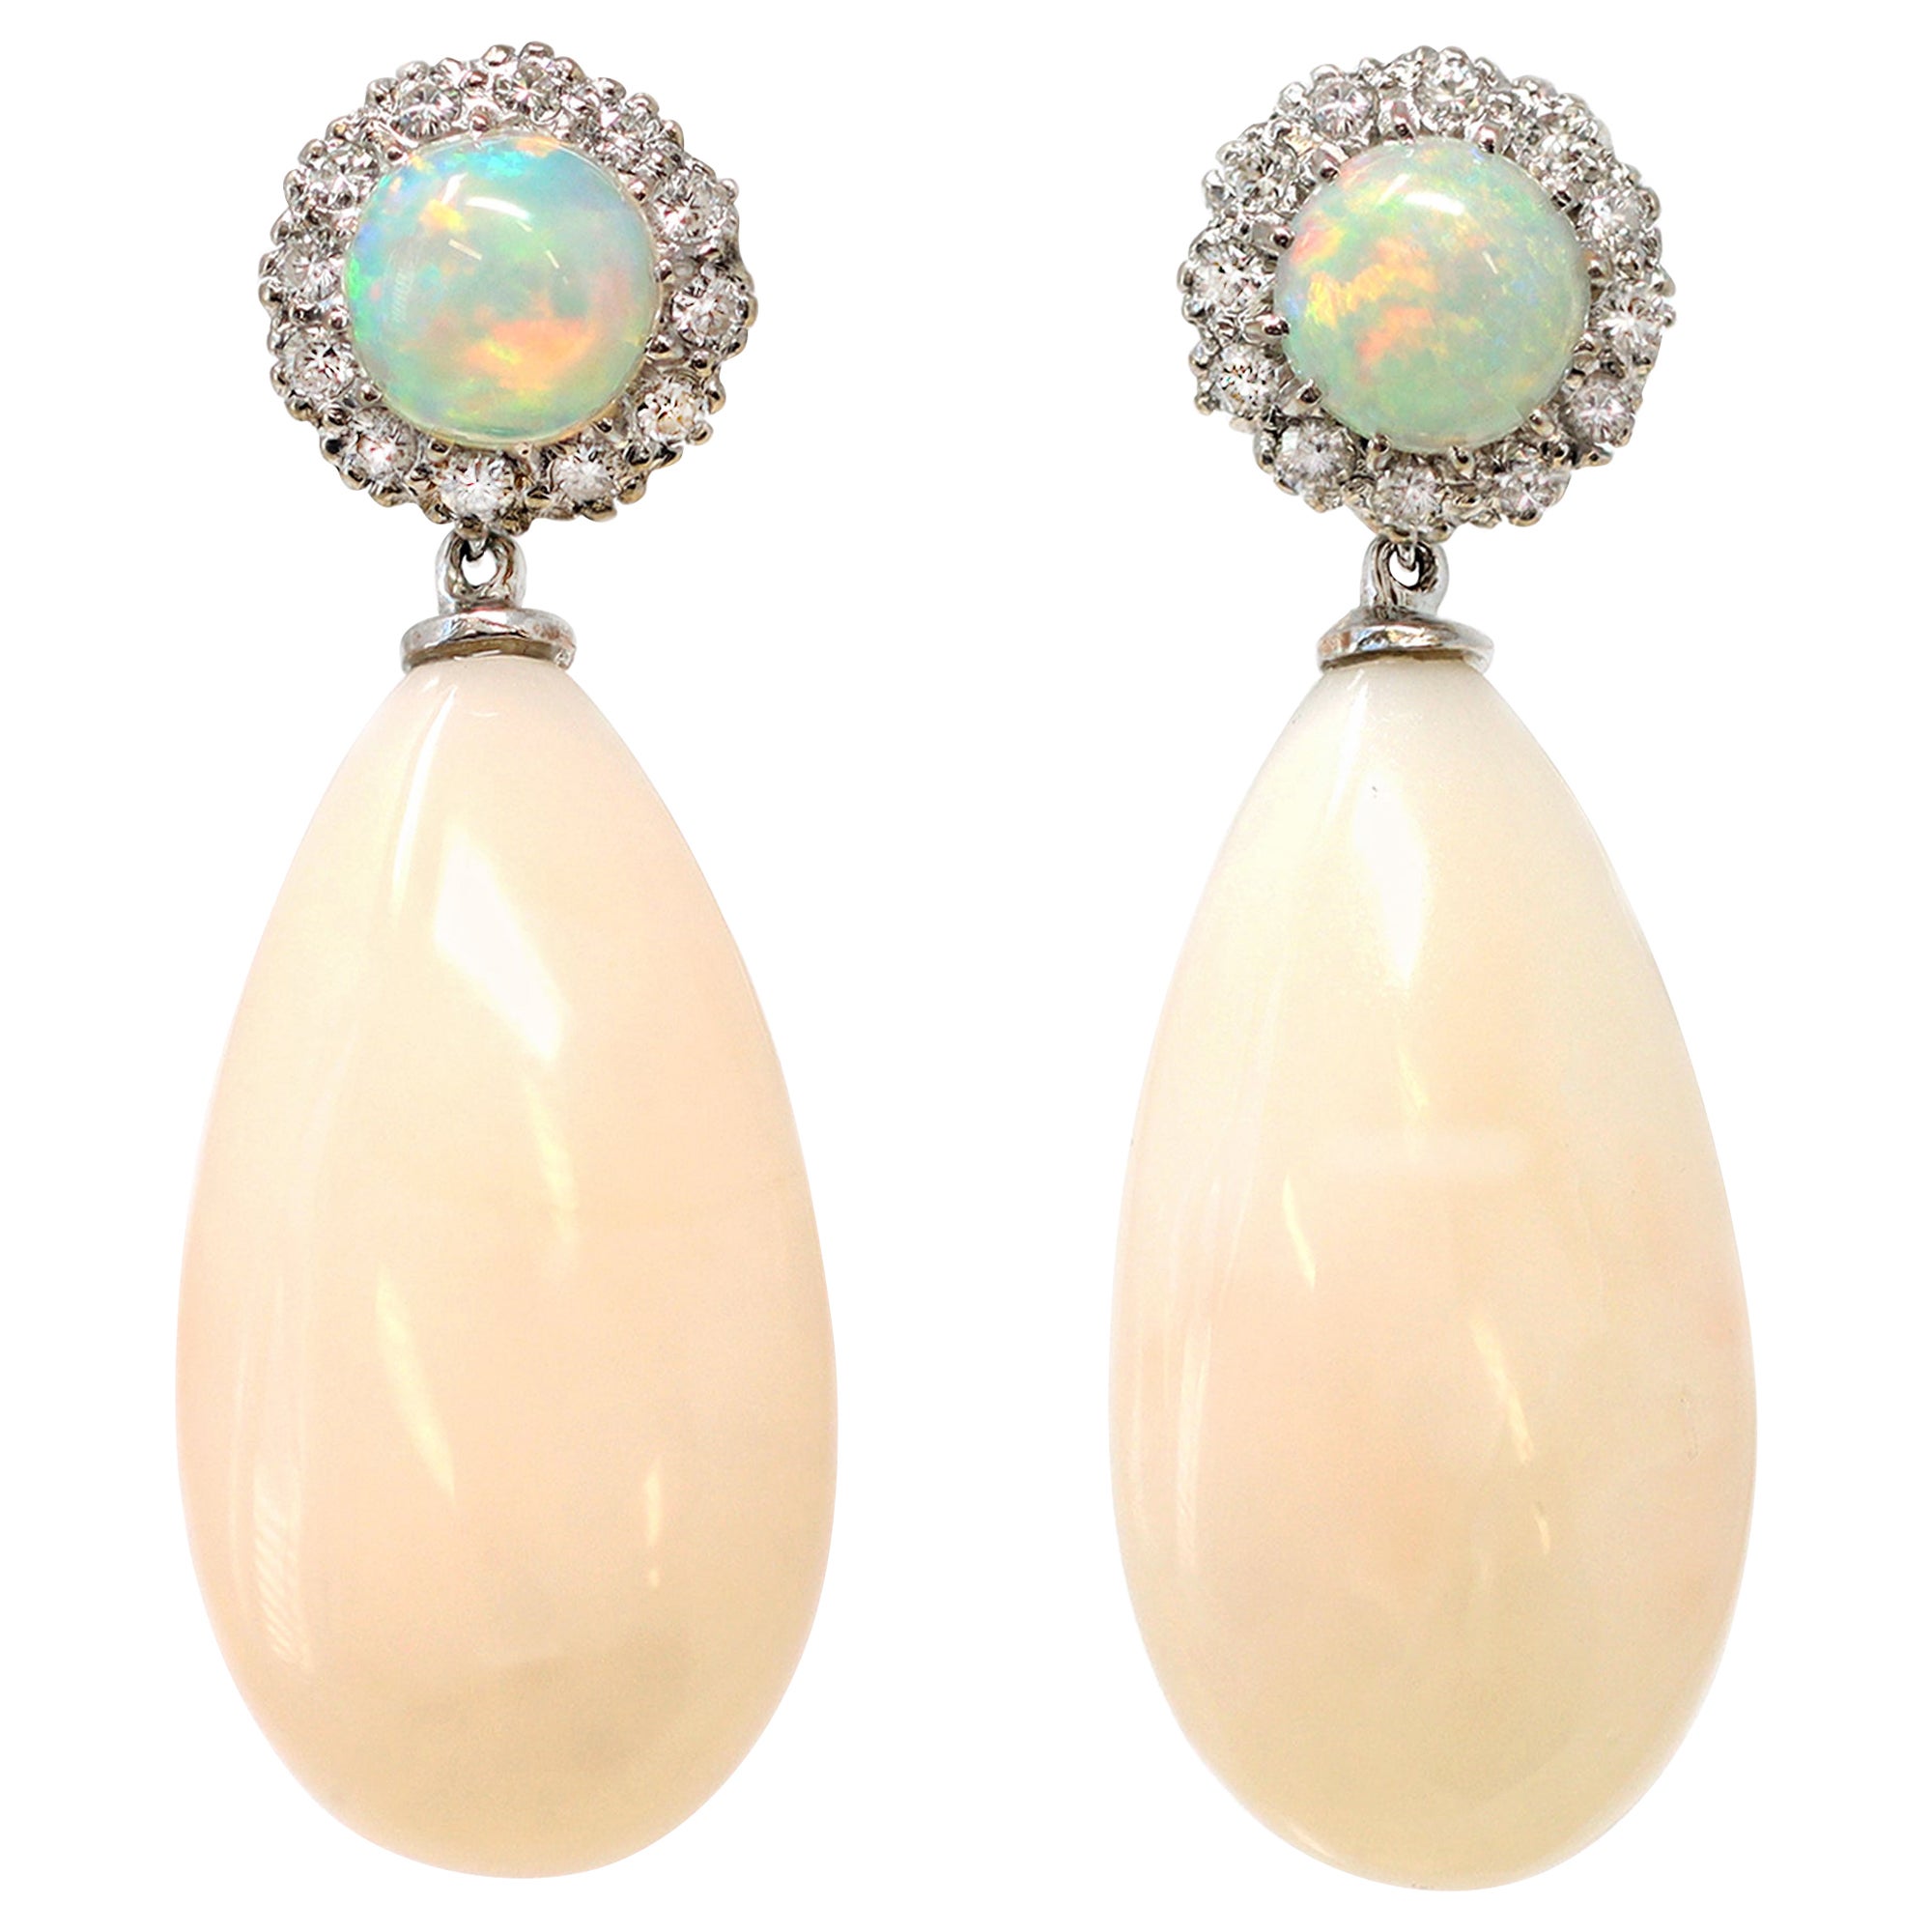 Coral Pendant Earrings with Diamond Halo Opal Set in 18k